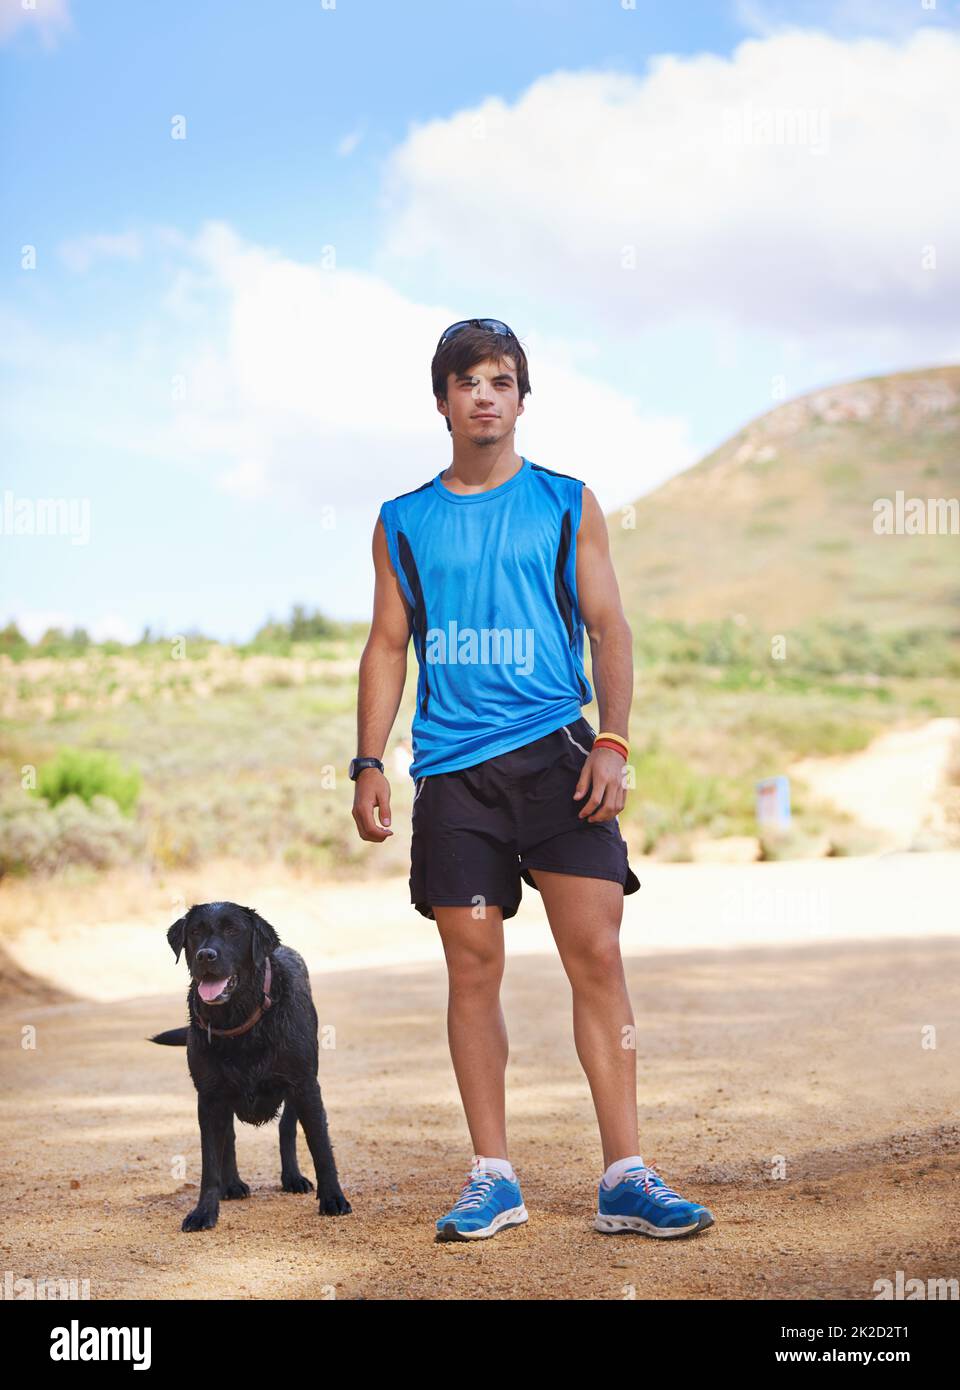 Theres nothing like fresh air and exercise. Shot of a young man exercising outdoors with his dog. Stock Photo